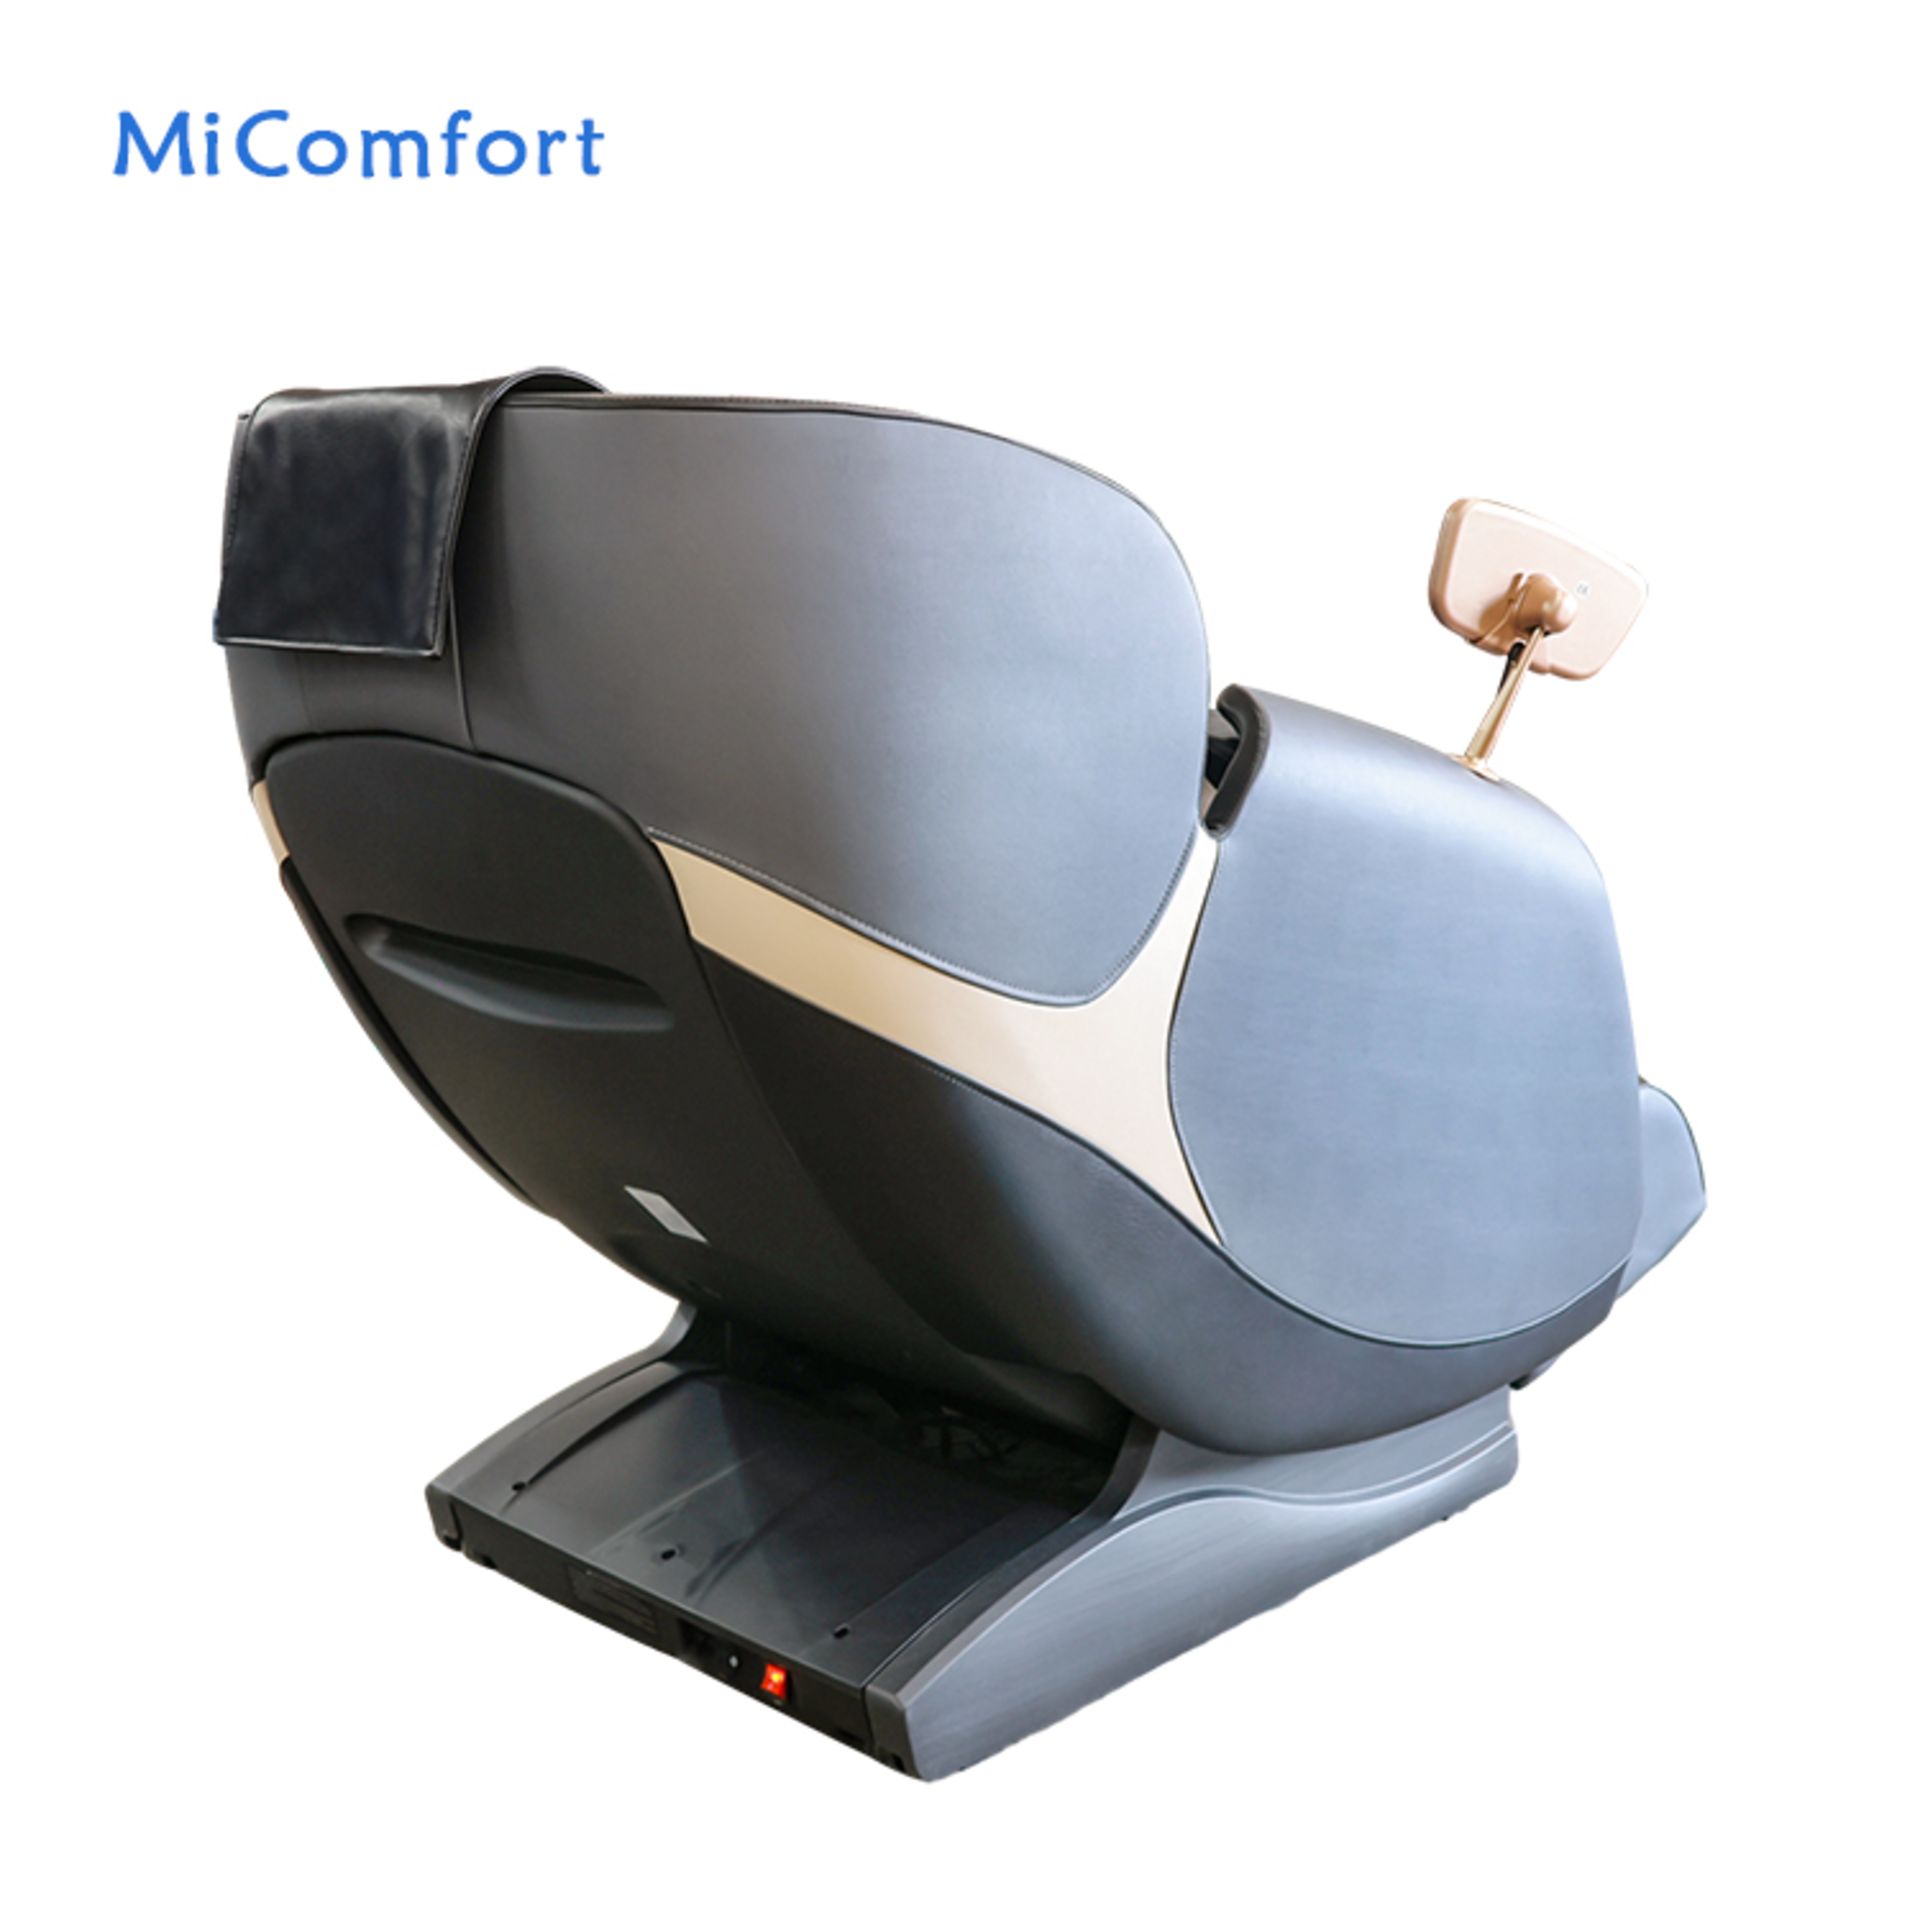 Brand New in Box Orchid MiComfort Full Body Massage Chair *NO VAT* - Image 5 of 13